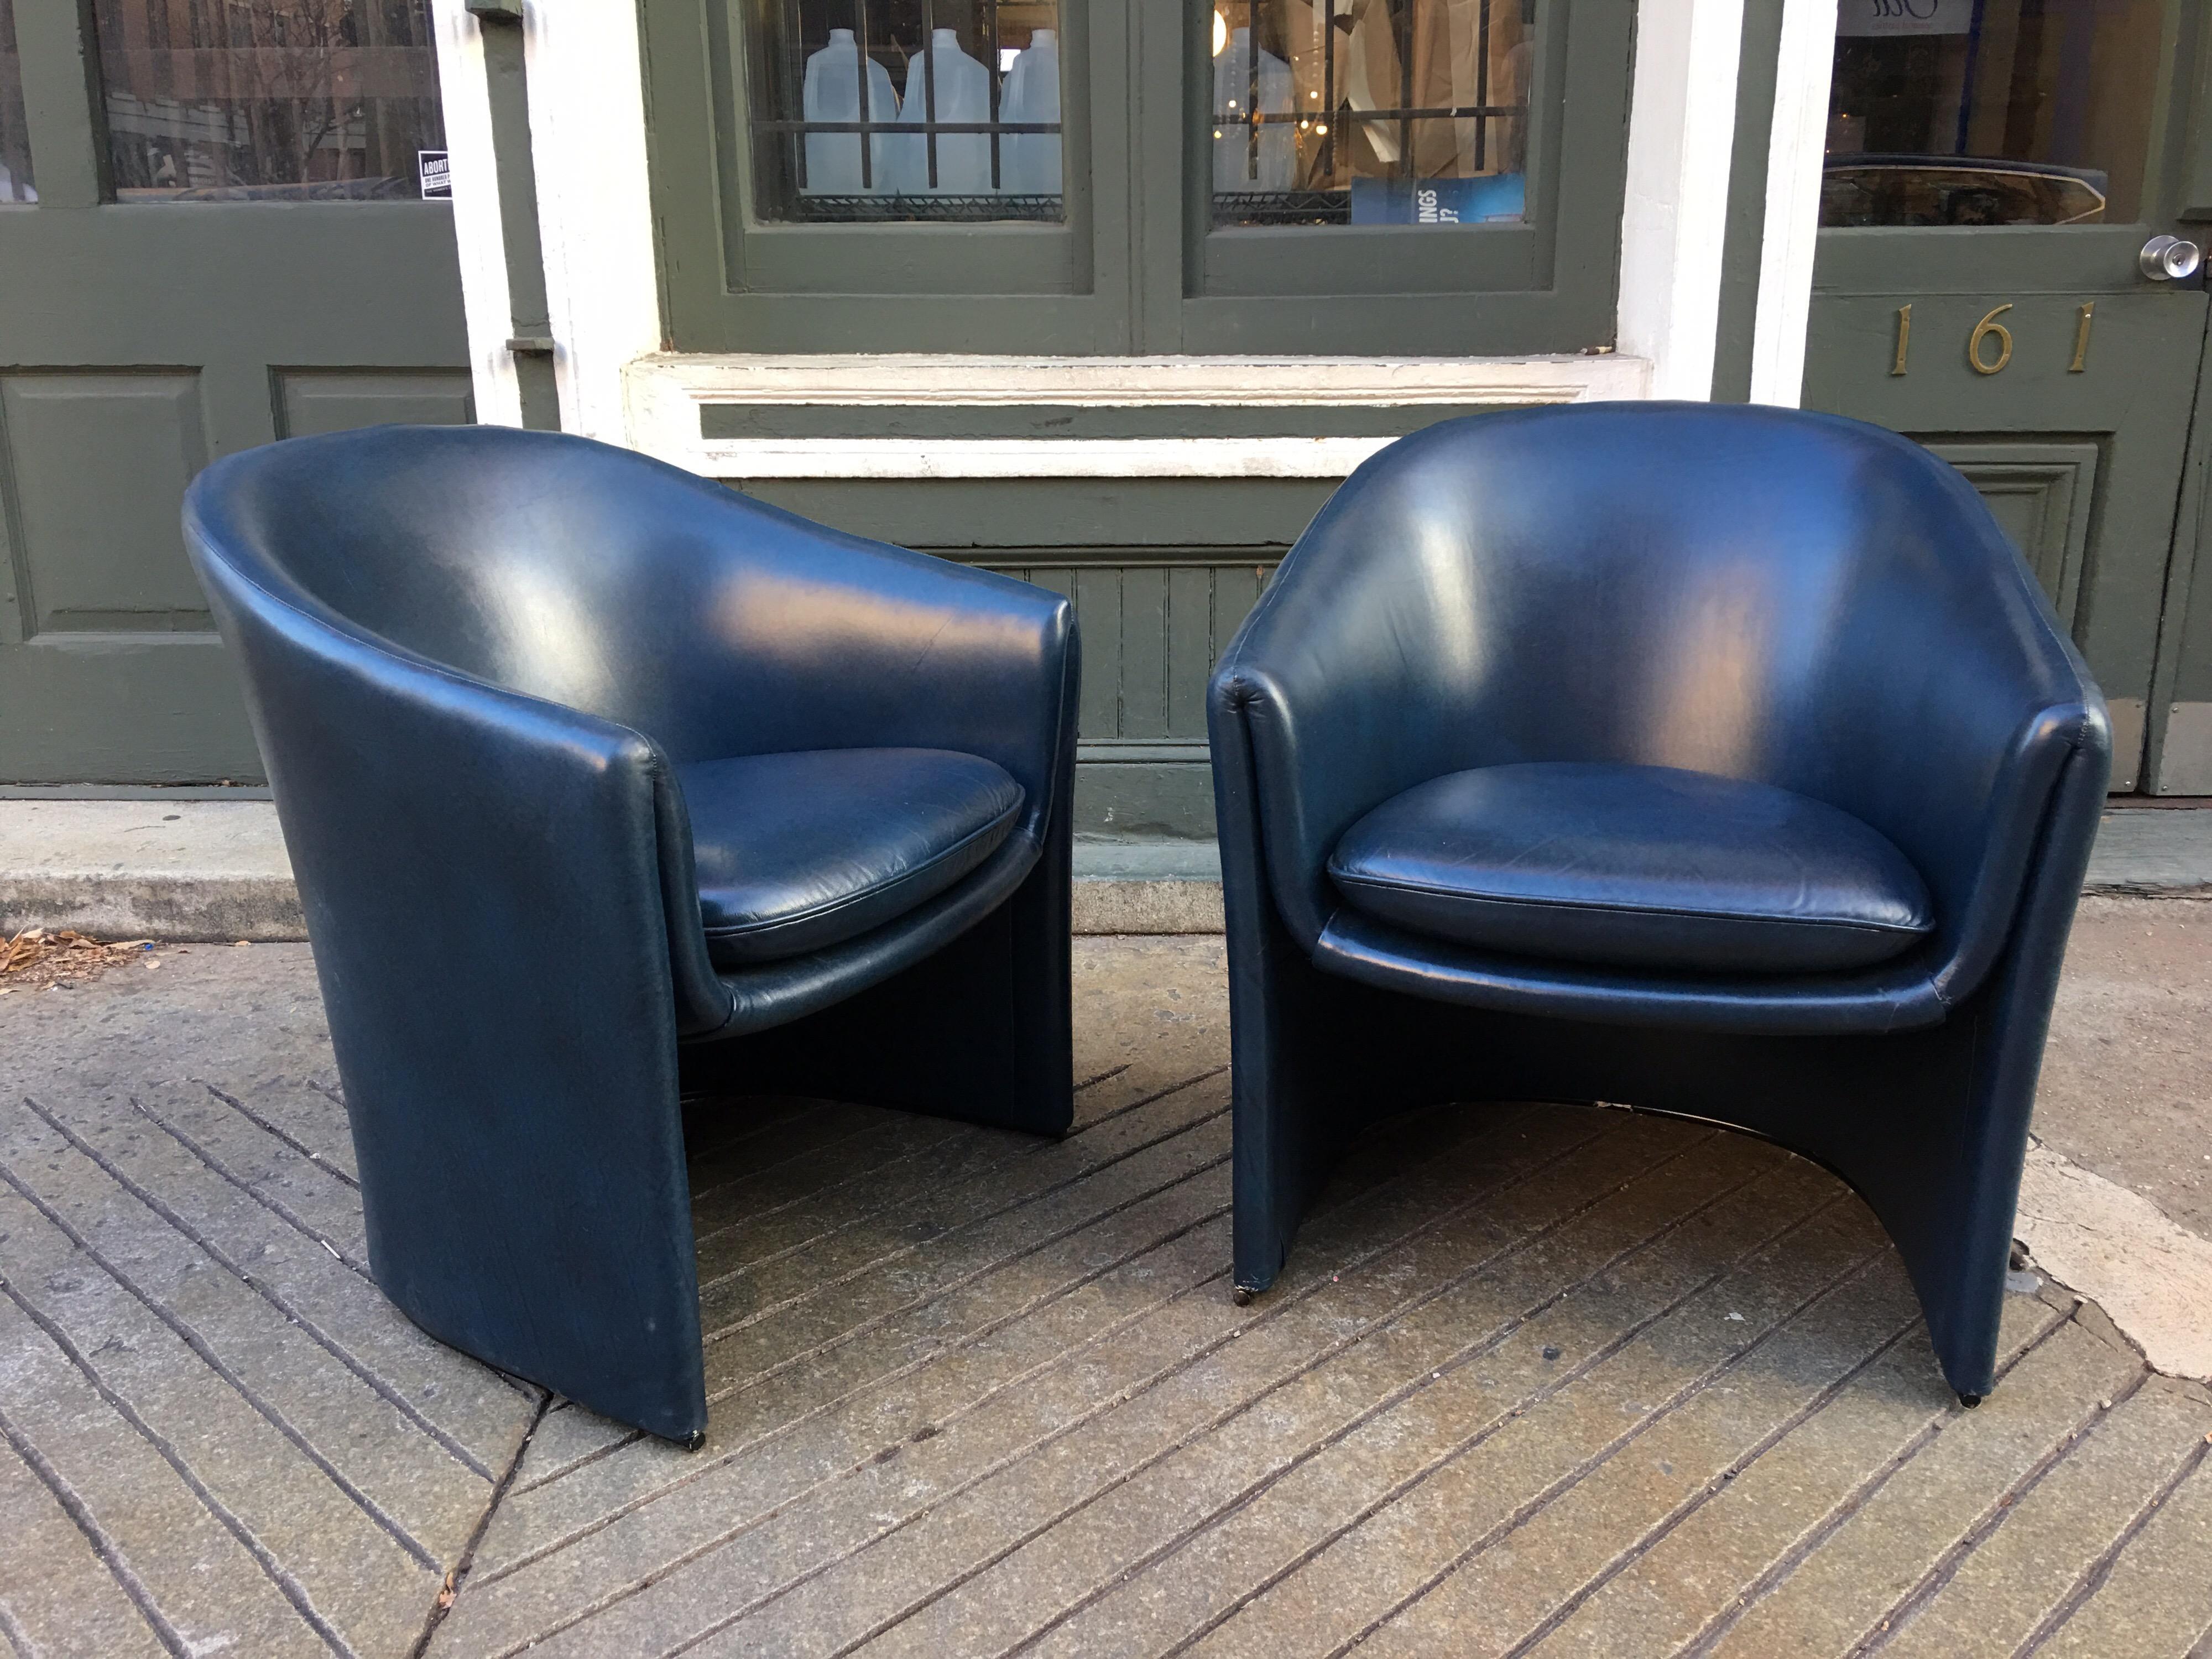 Pair of Dunbar chairs in a Dark Vinyl, possibly designed by Roger Sprunger?! Great scale and very comfortable.